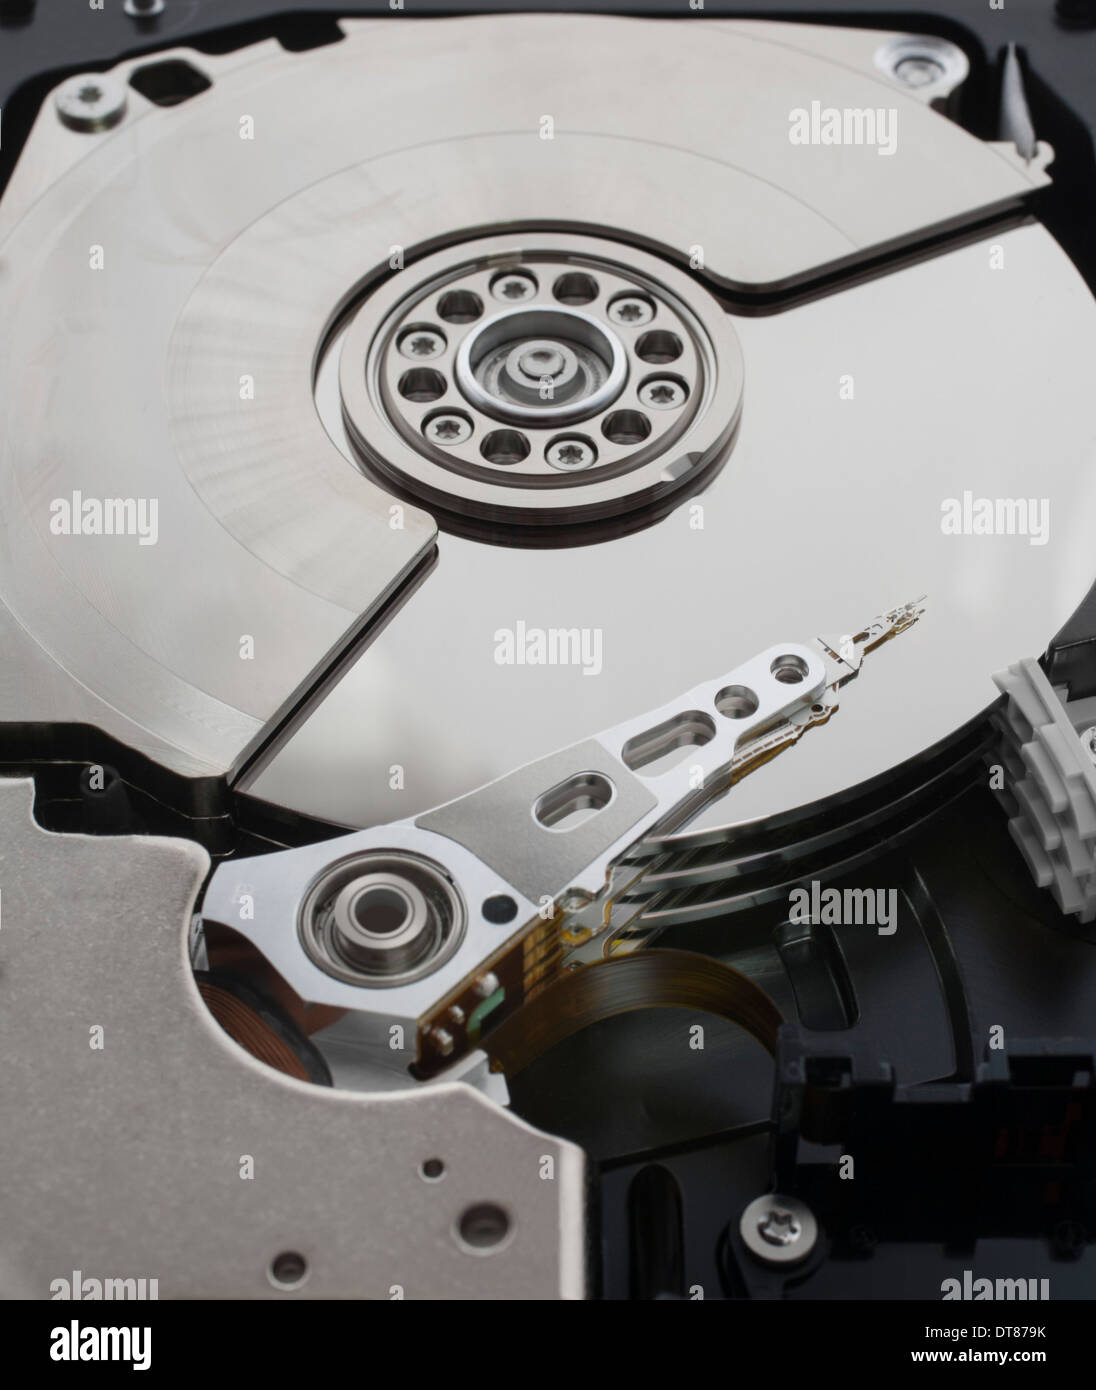 Close up of the internal mechanism of a computer hard disk drive. Stock Photo